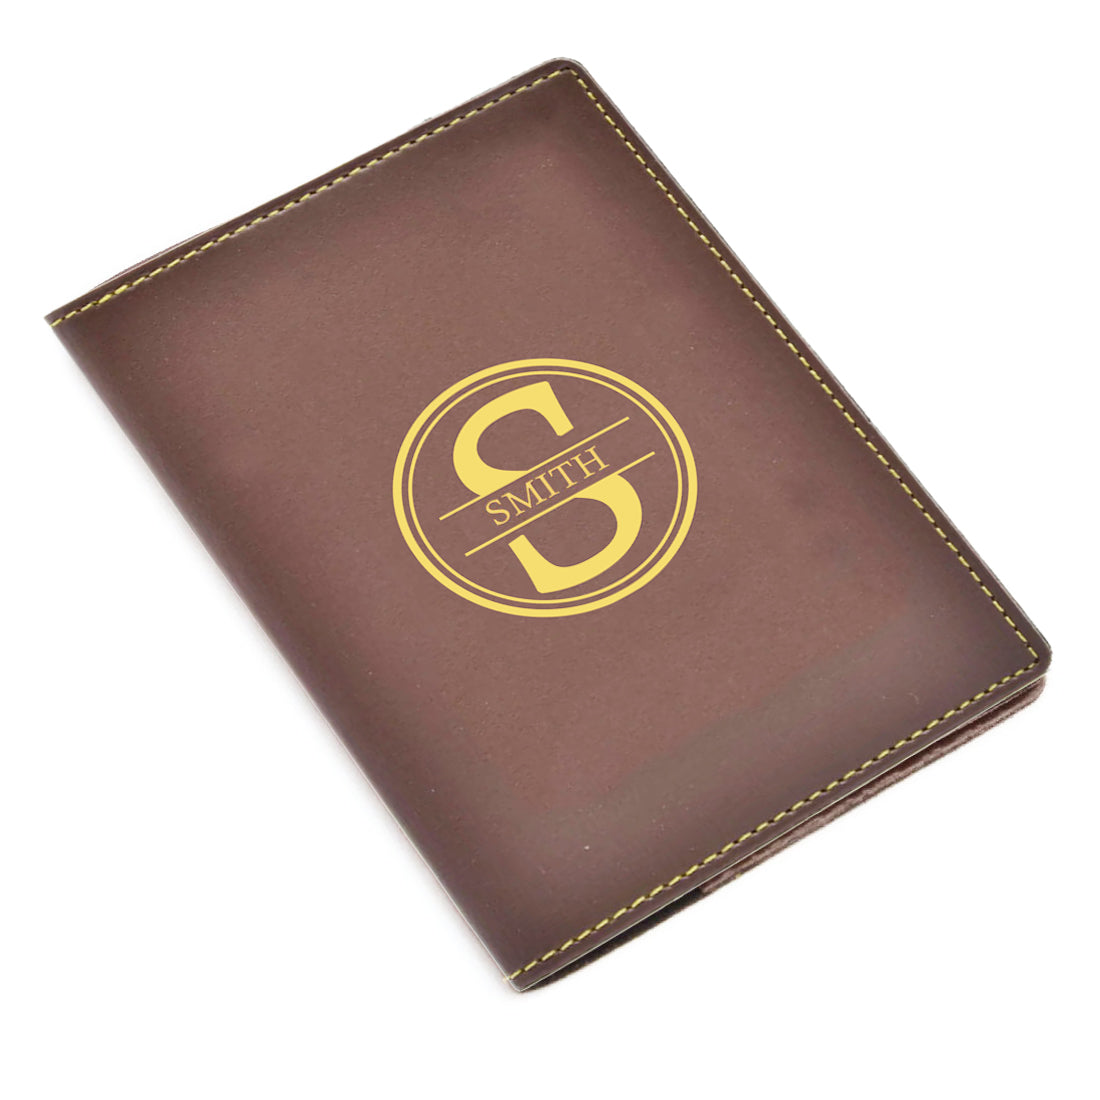 Customized Passport Cover PU Leather Case Add Name - Monogram